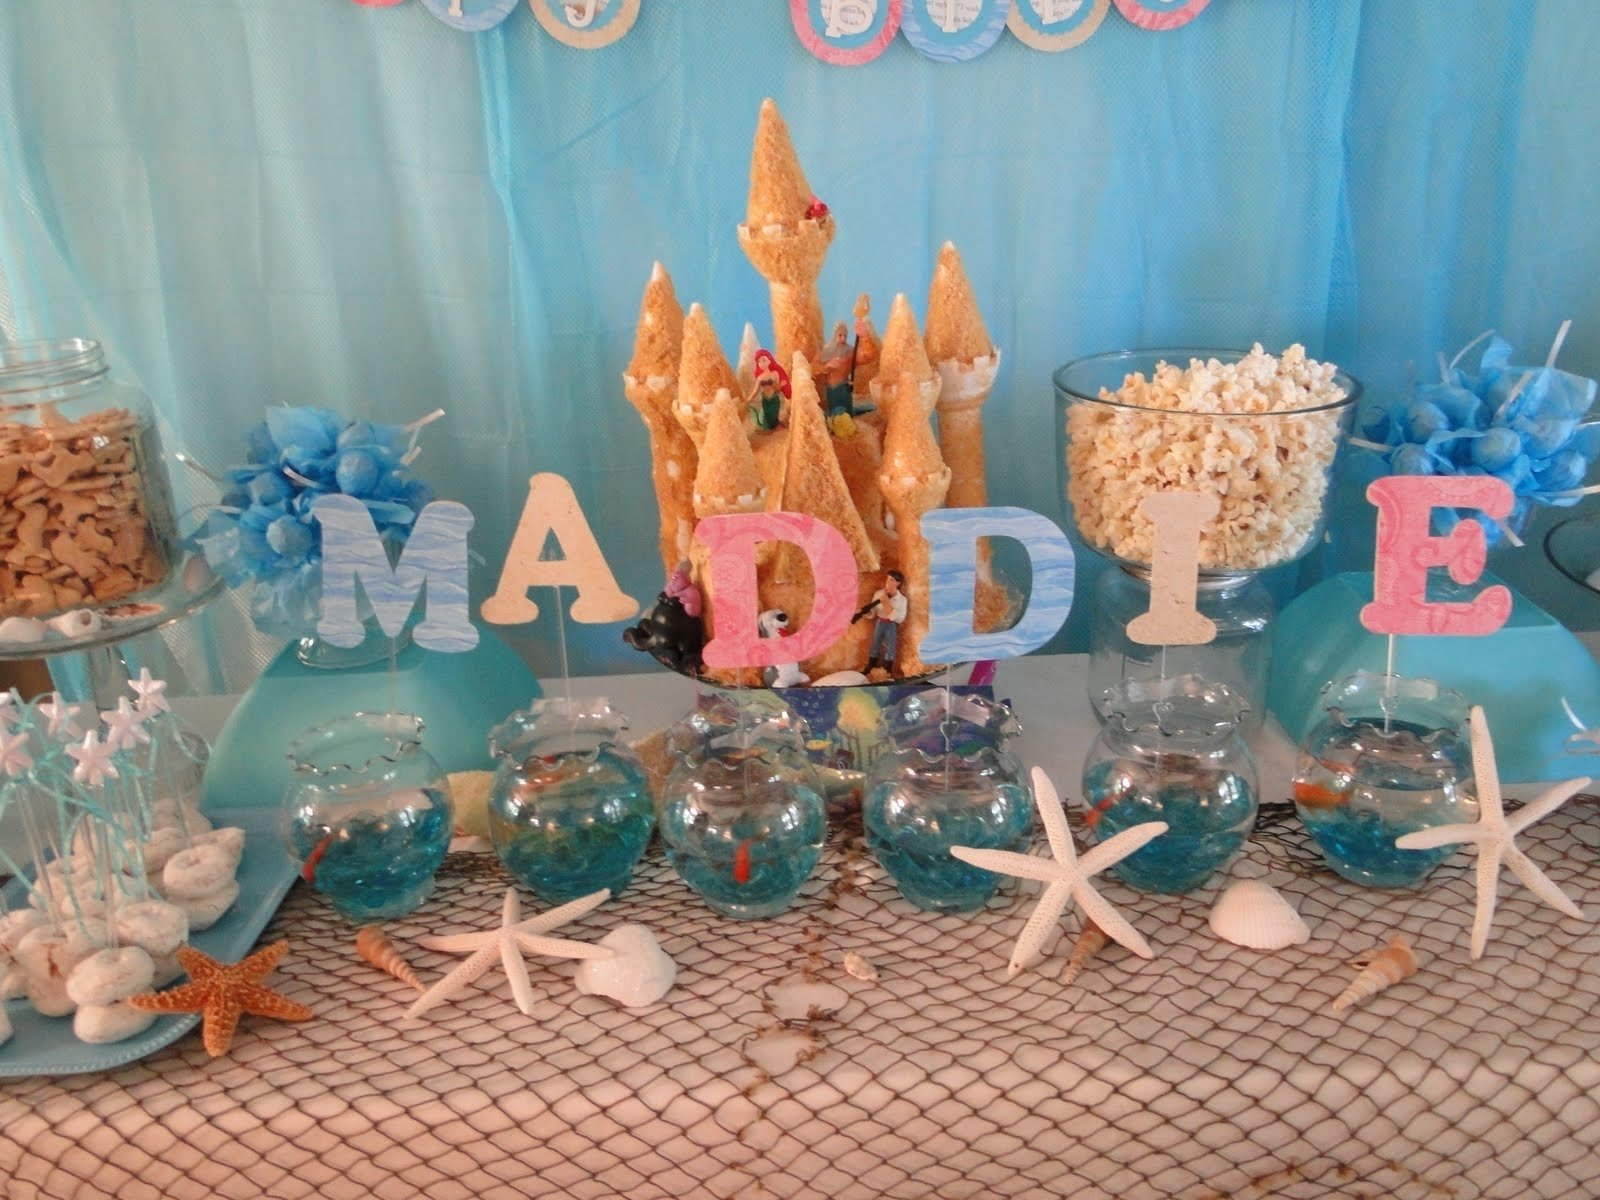 10 Most Recommended The Little Mermaid Party Ideas karas party ideas little mermaid under the sea birthday party 1 2022